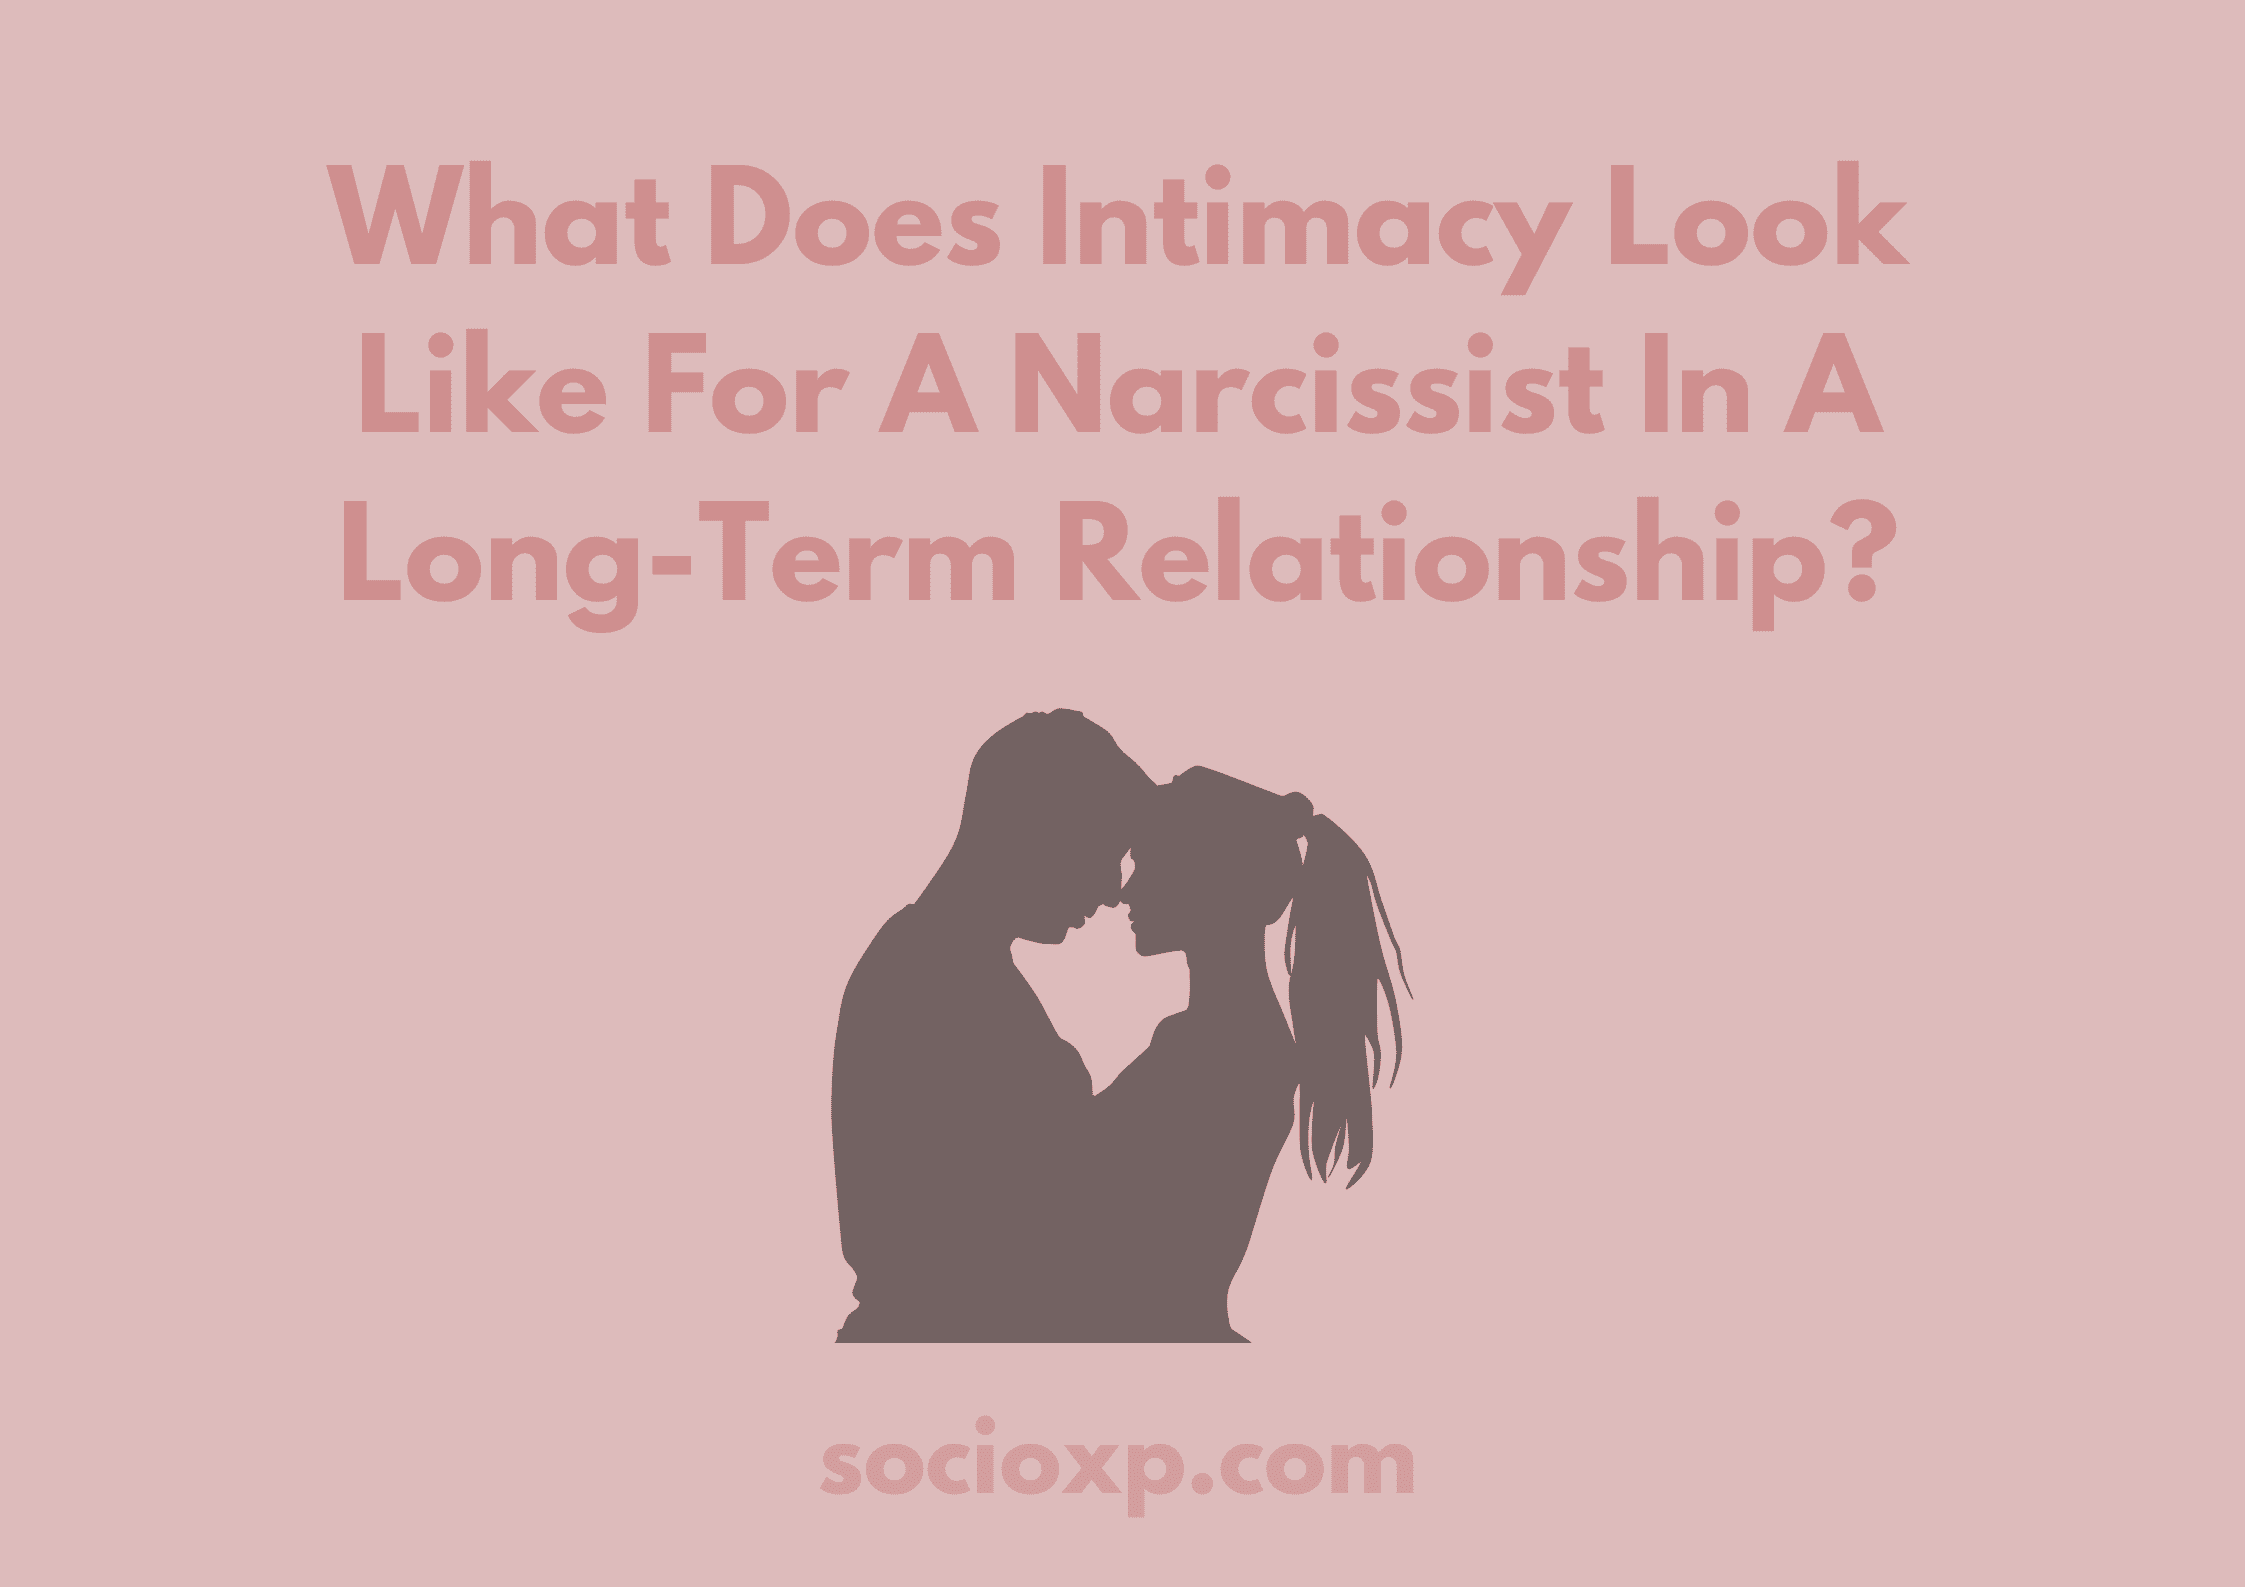 What Does Intimacy Look Like For A Narcissist In A Long-Term Relationship?